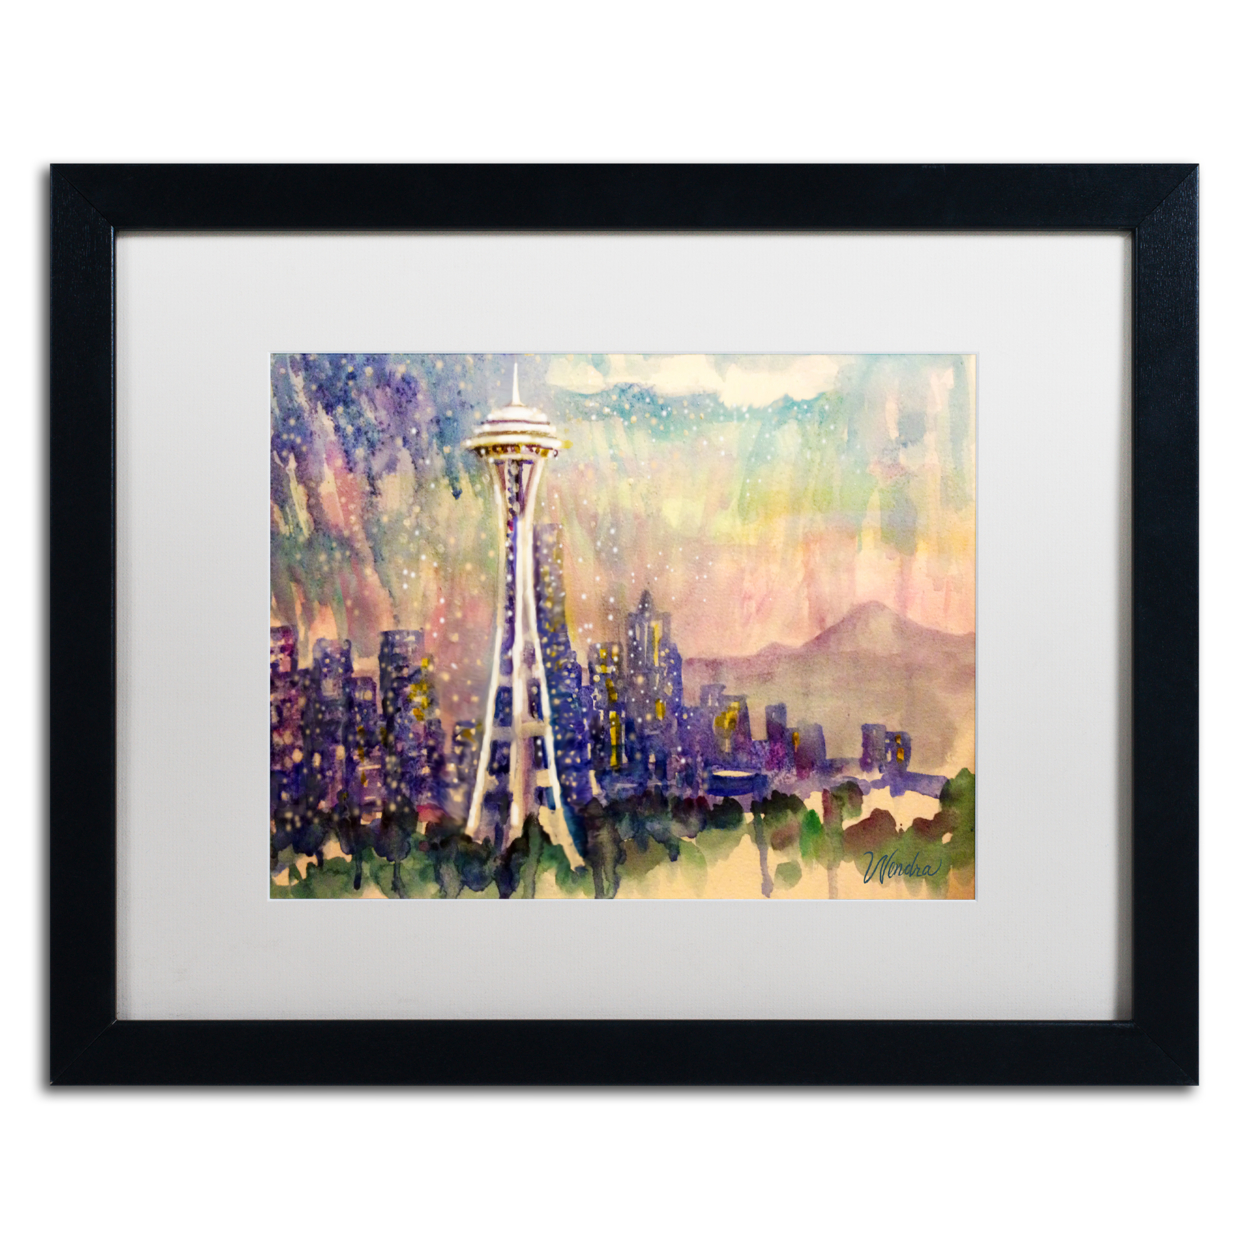 Wendra 'Space Needle Snow' Black Wooden Framed Art 18 X 22 Inches